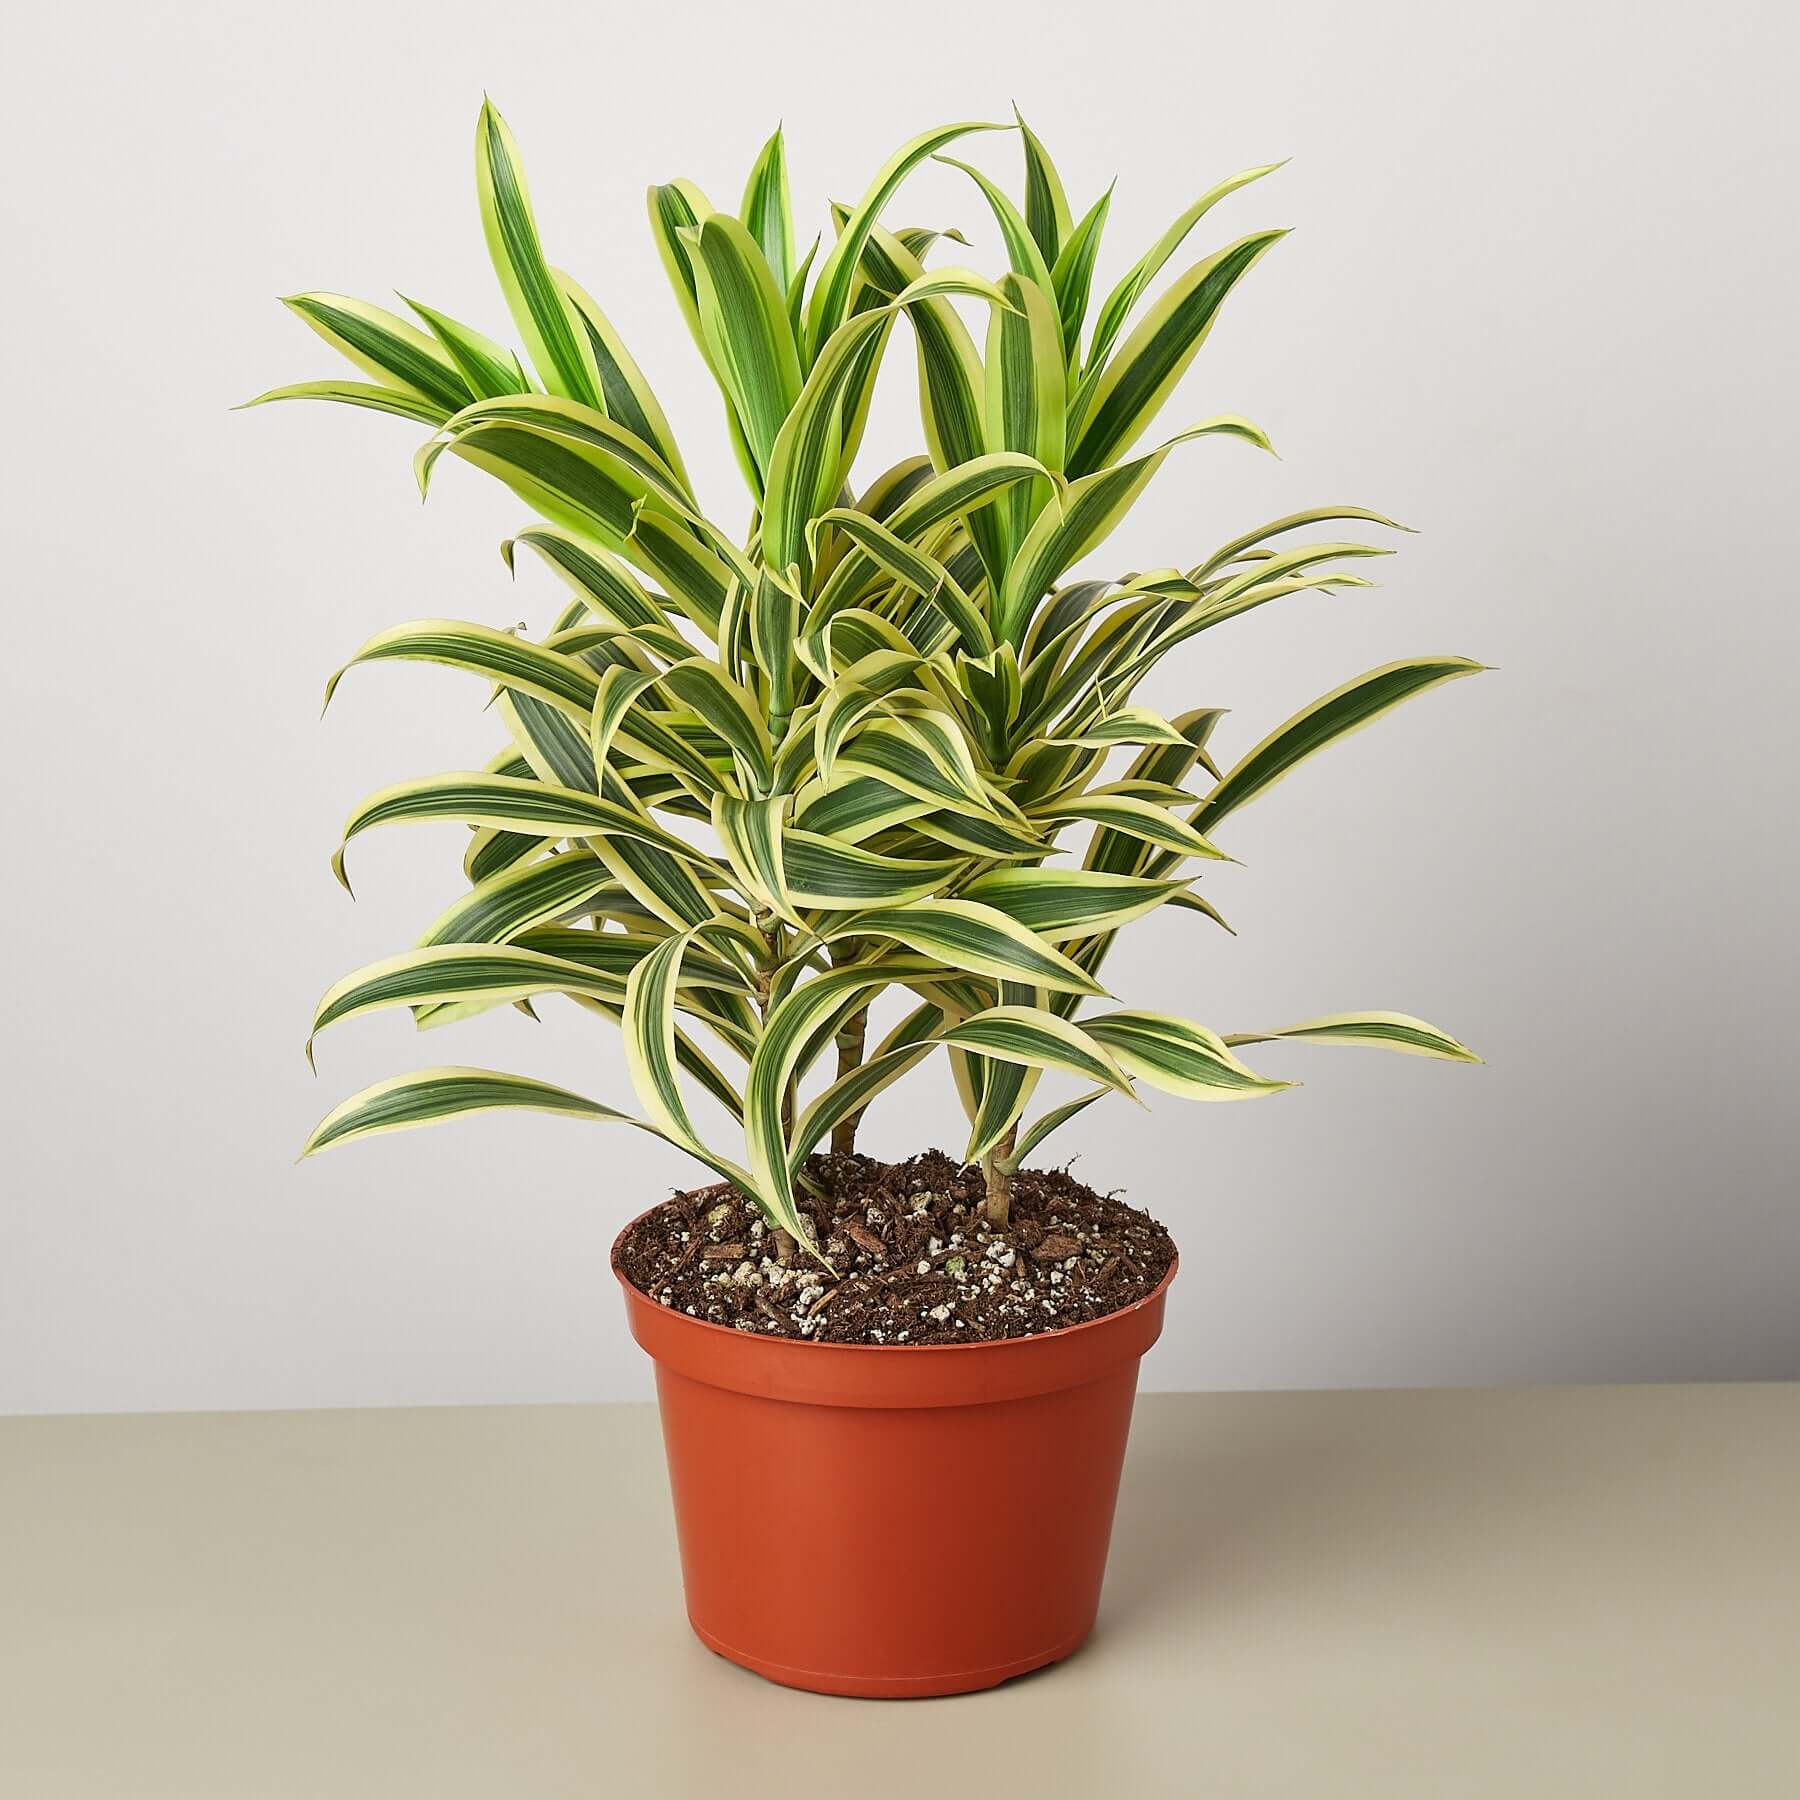 Dracaena - Song of India | Modern house plants that clean the air